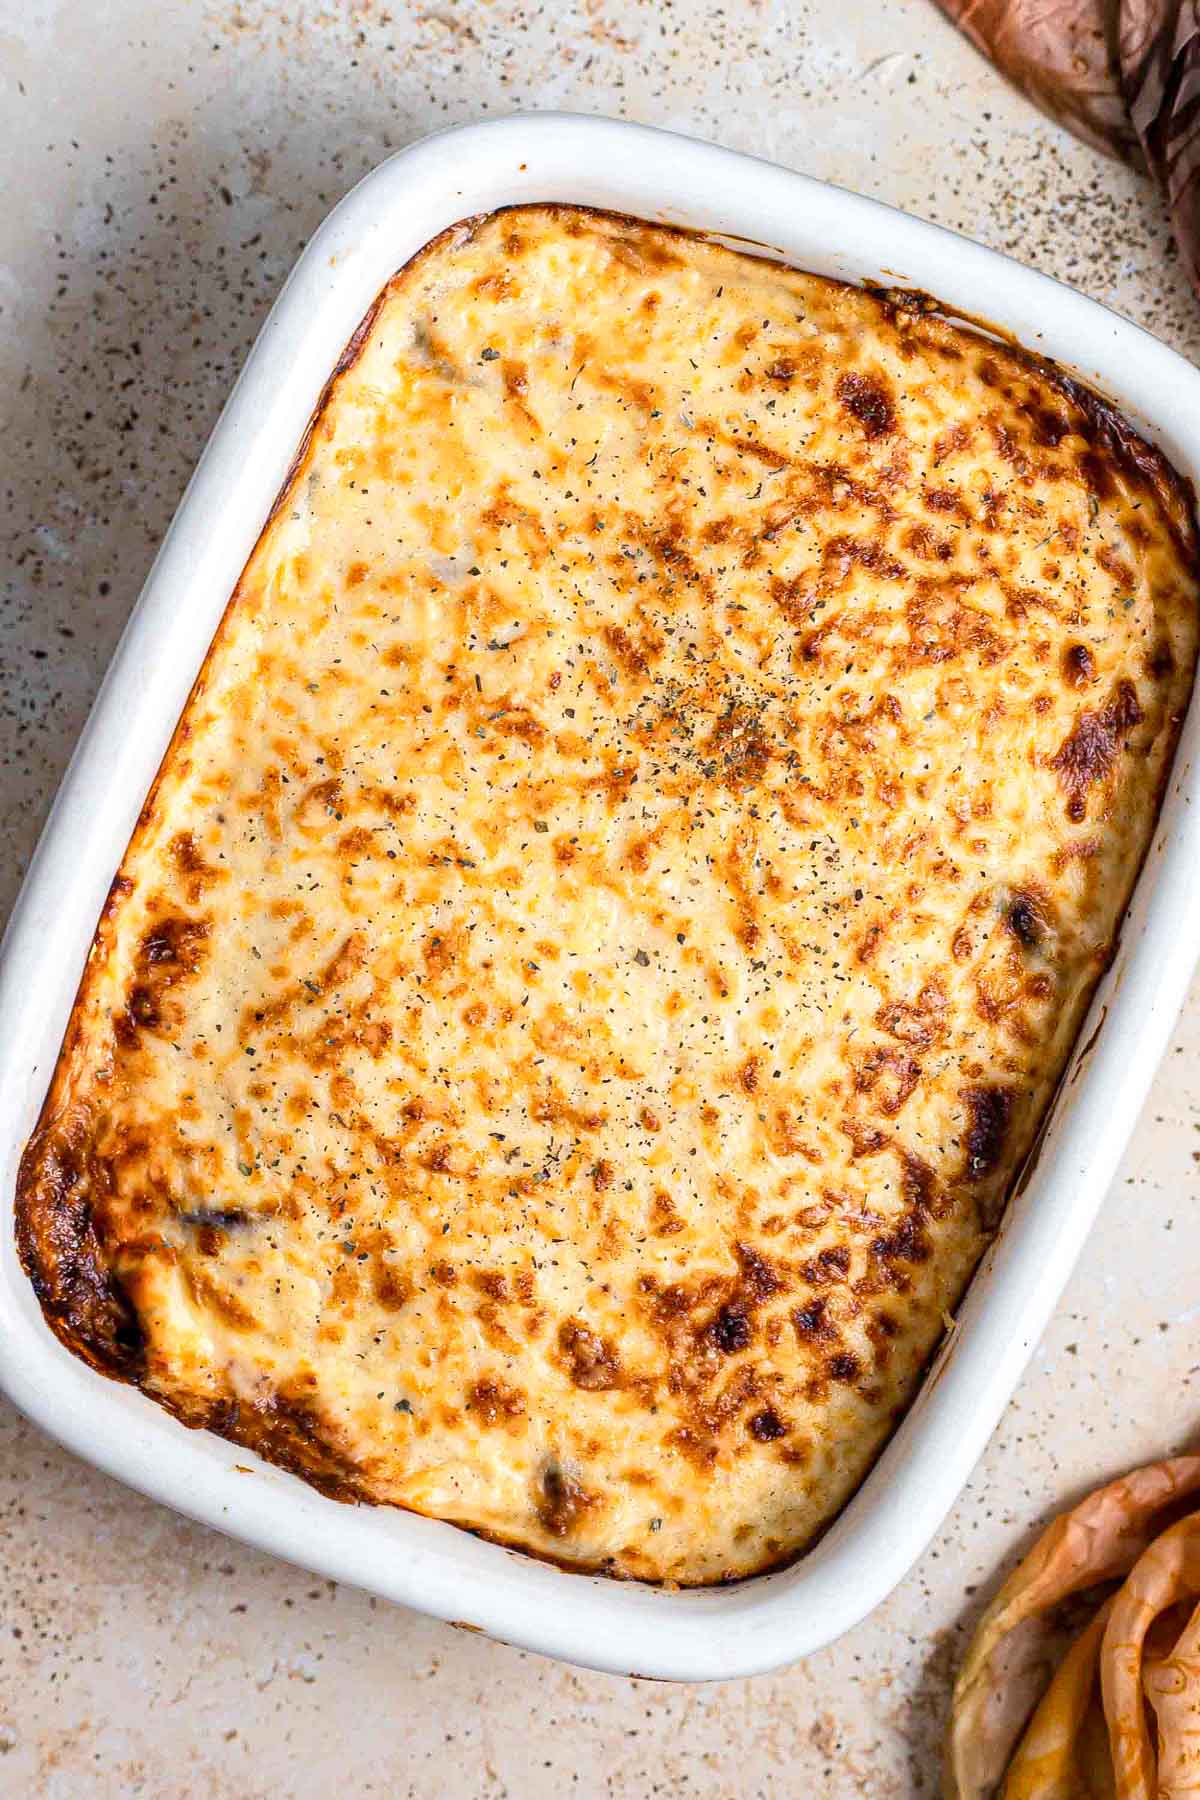 baked moussaka in rectangle dish seen from above.